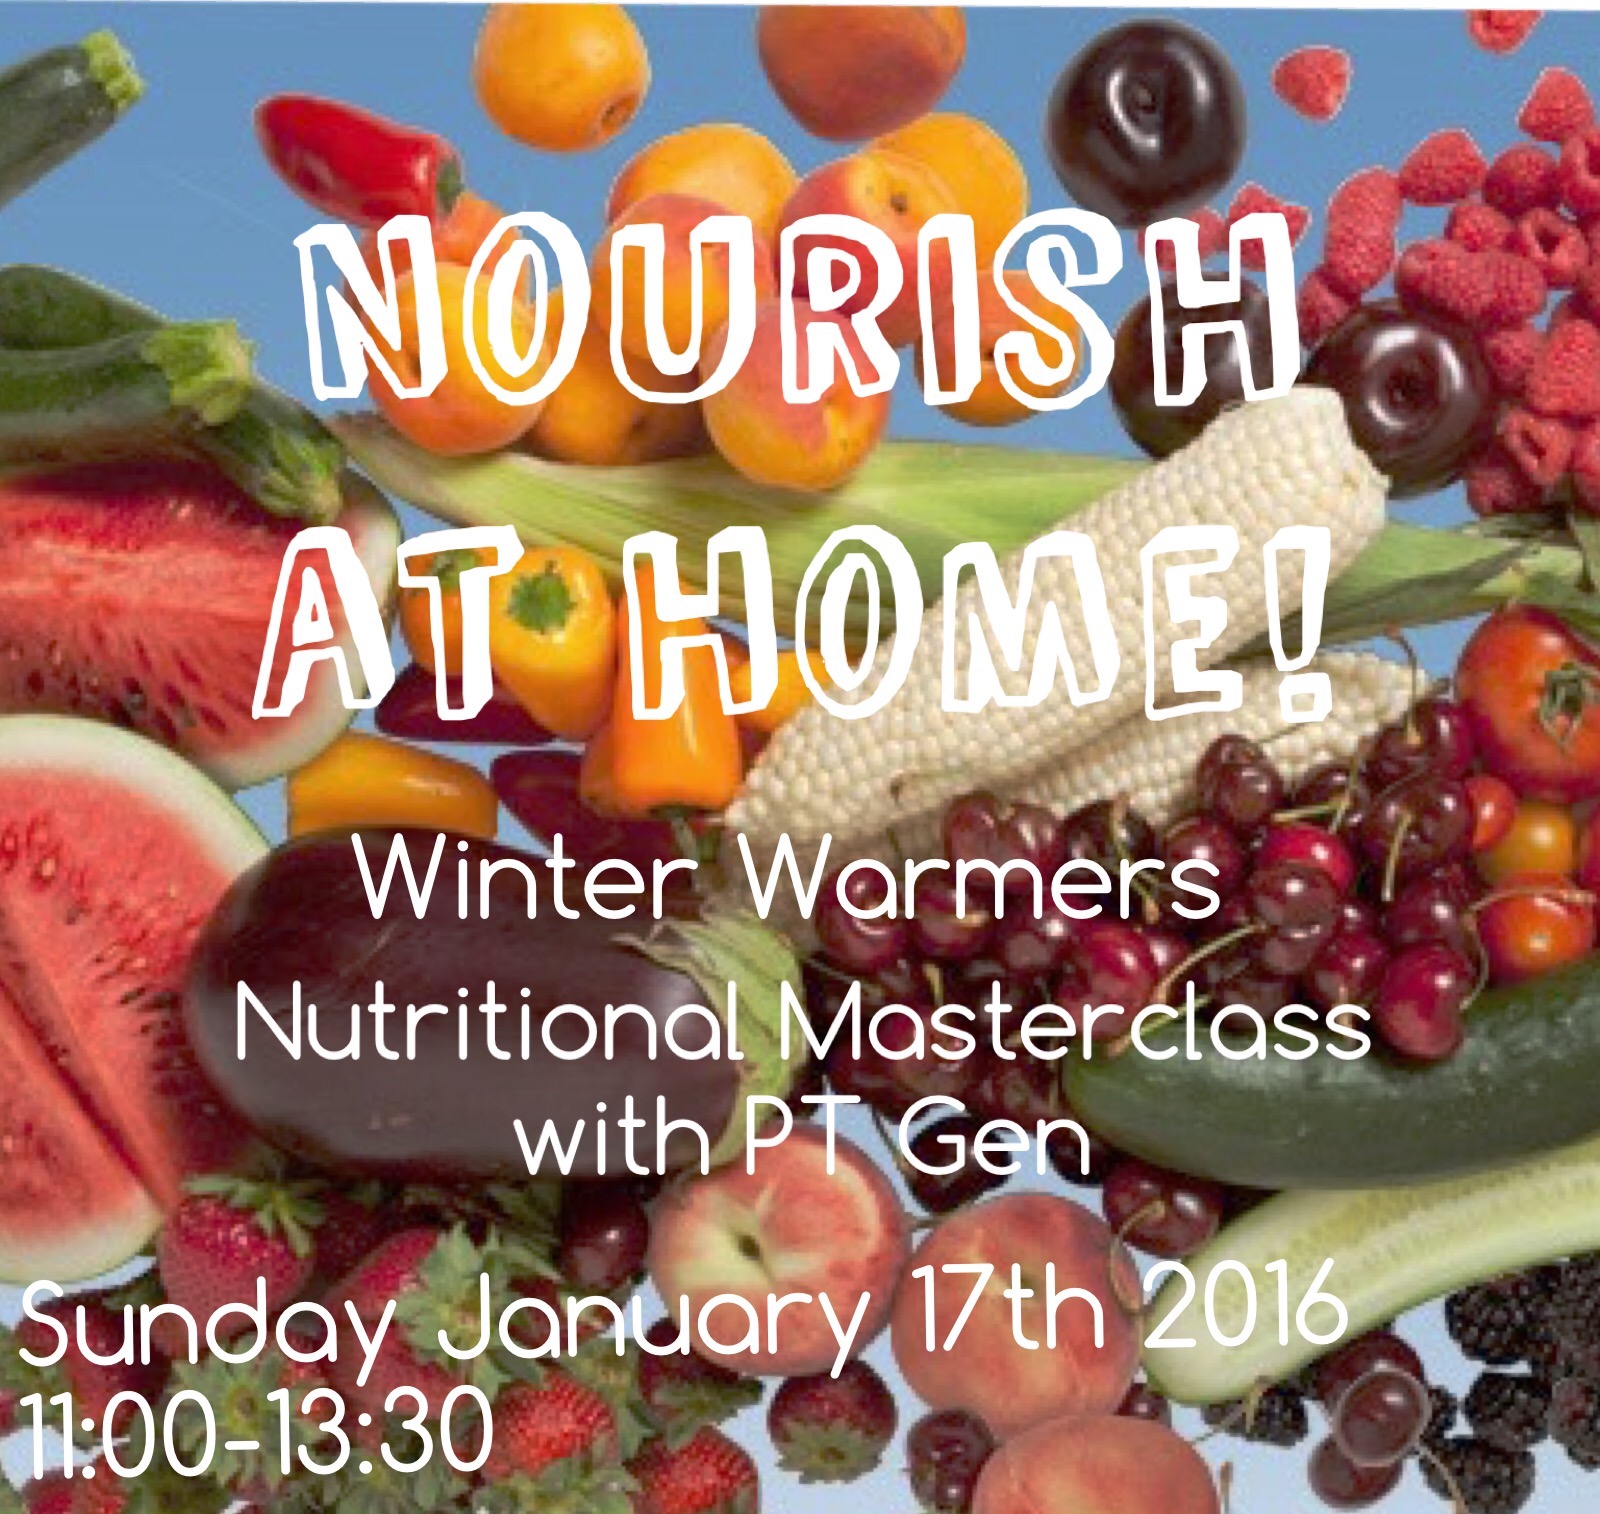 Nourish at Home: Winter Warmers Workshop!